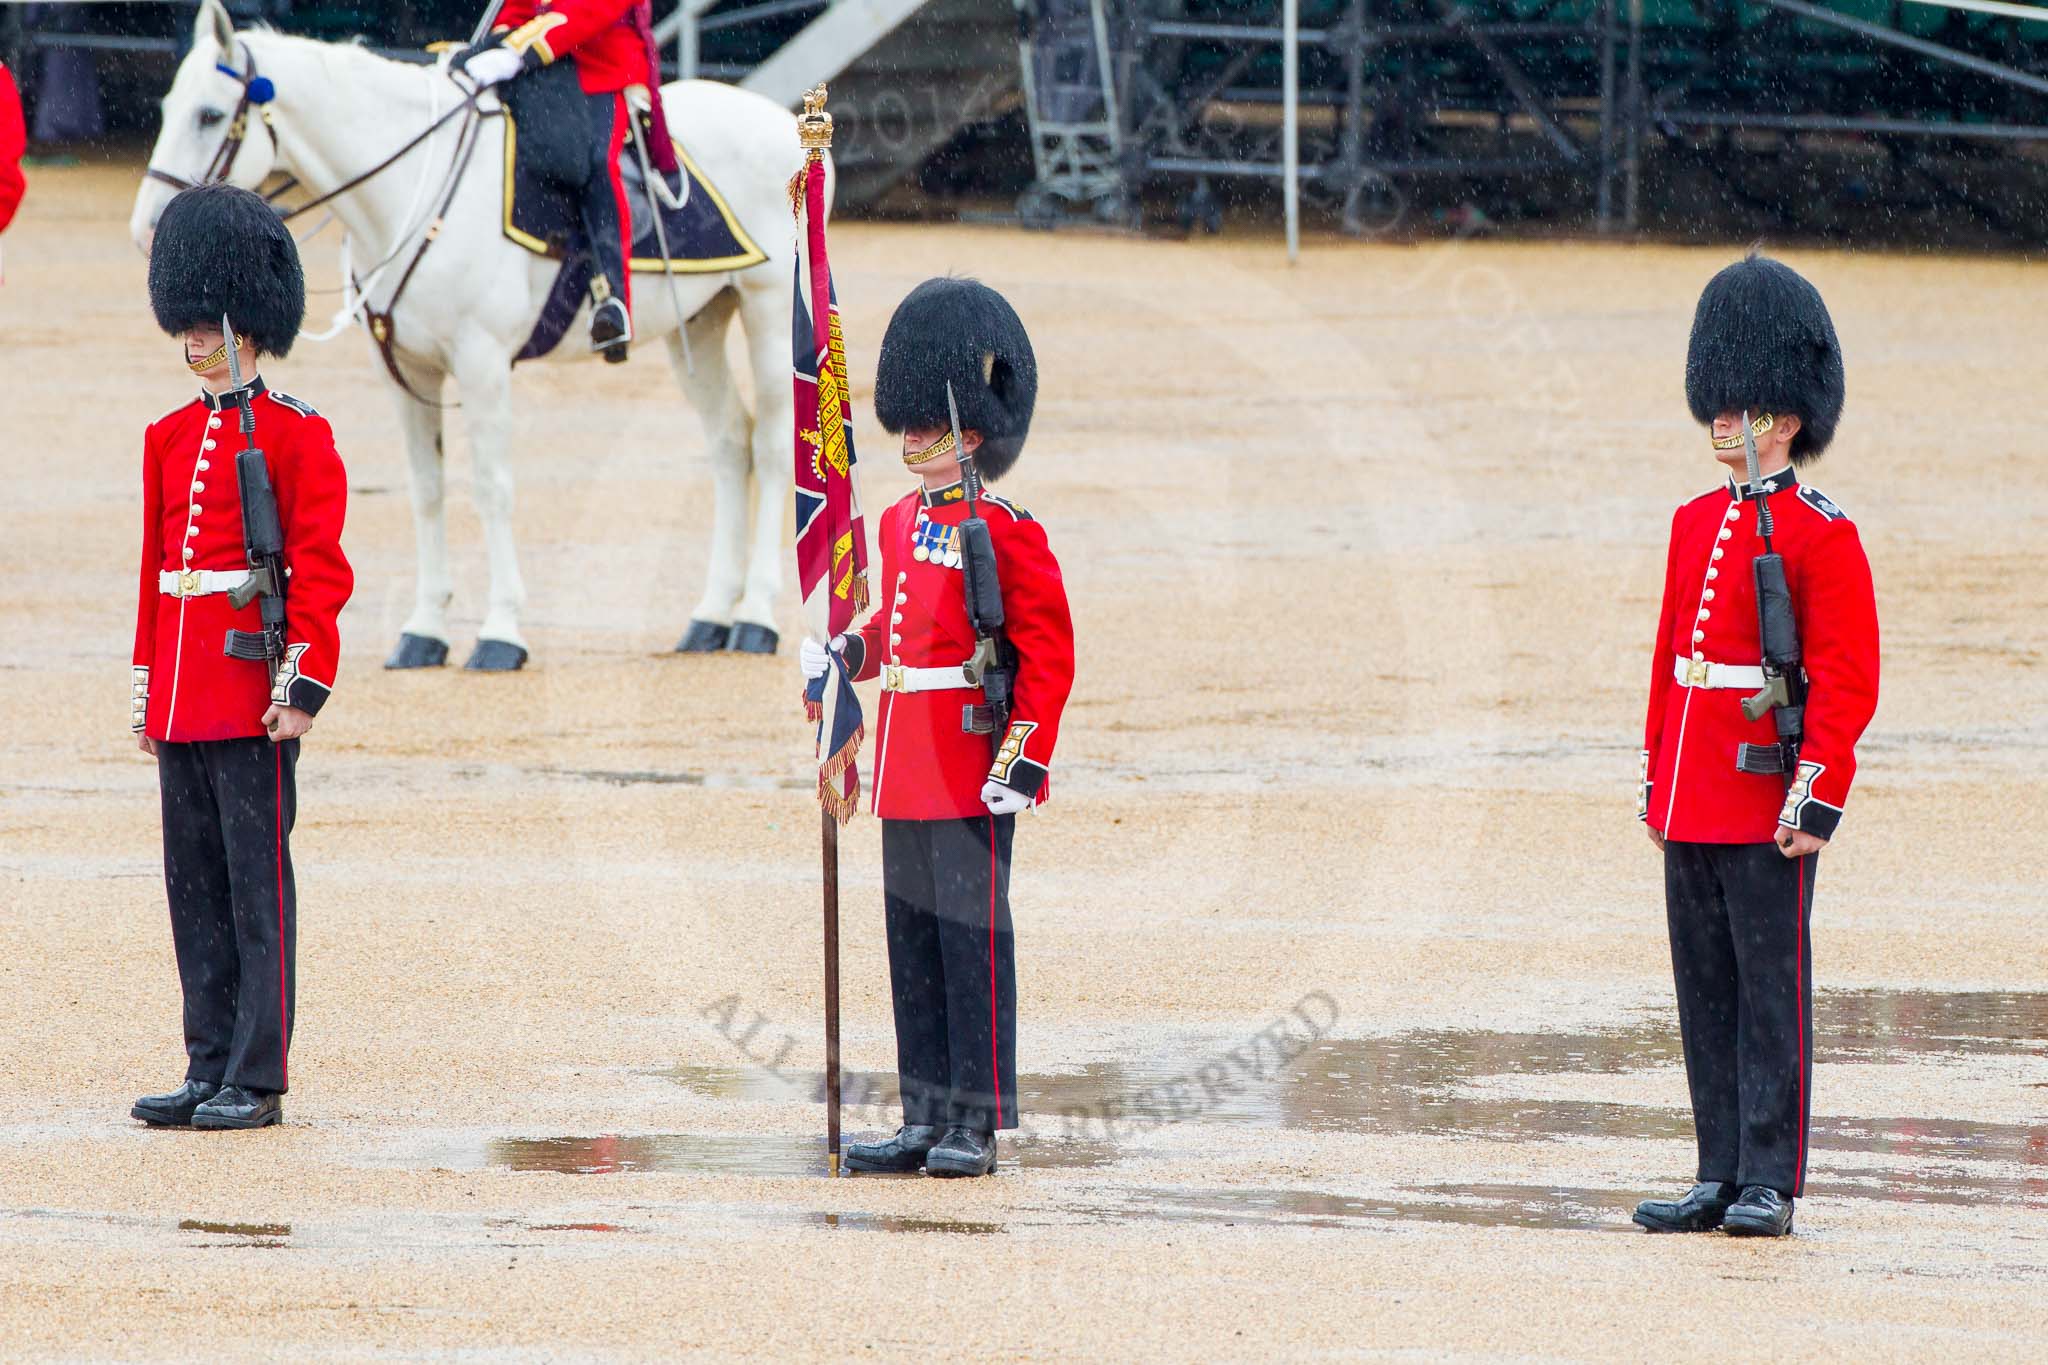 The Colonel's Review 2014.
Horse Guards Parade, Westminster,
London,

United Kingdom,
on 07 June 2014 at 11:17, image #378